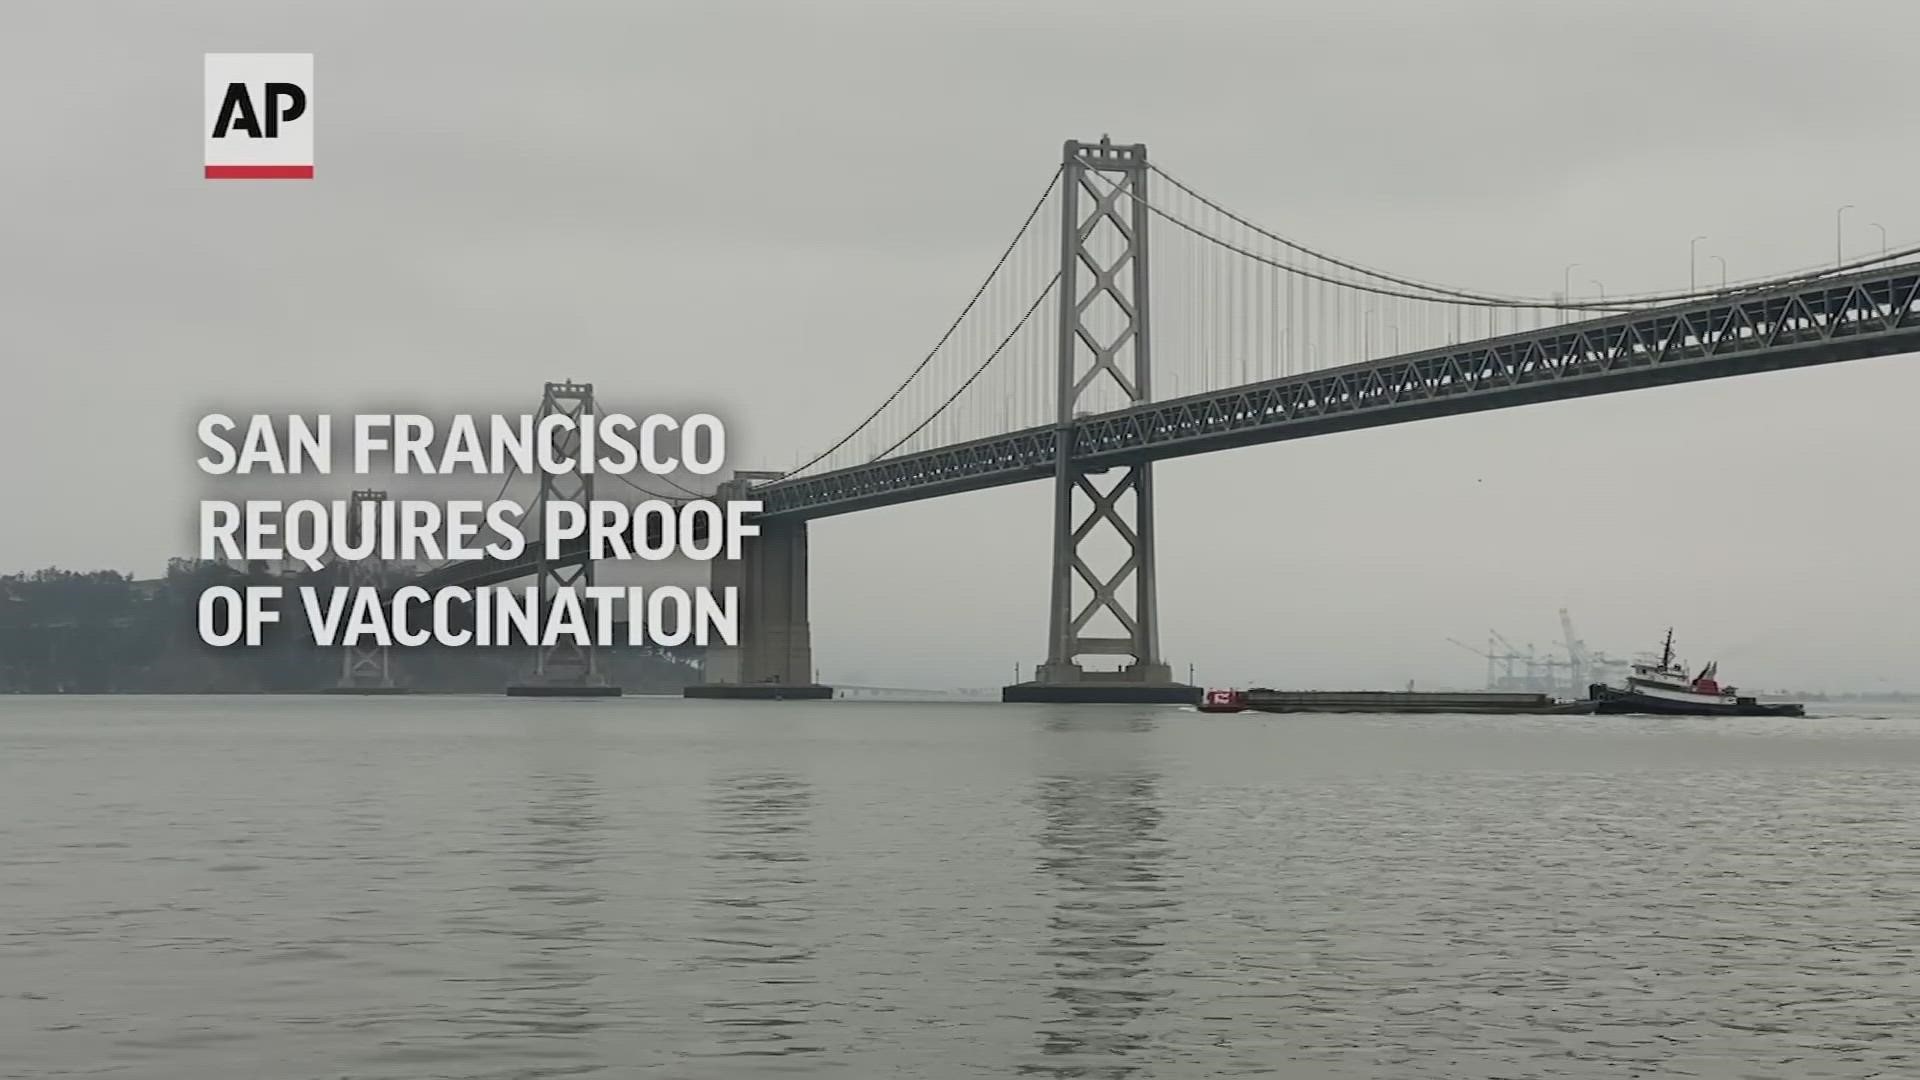 While other cities have required proof of at lease partial vaccination, San Francisco became the first major U.S. city Friday to require proof of full vaccination.